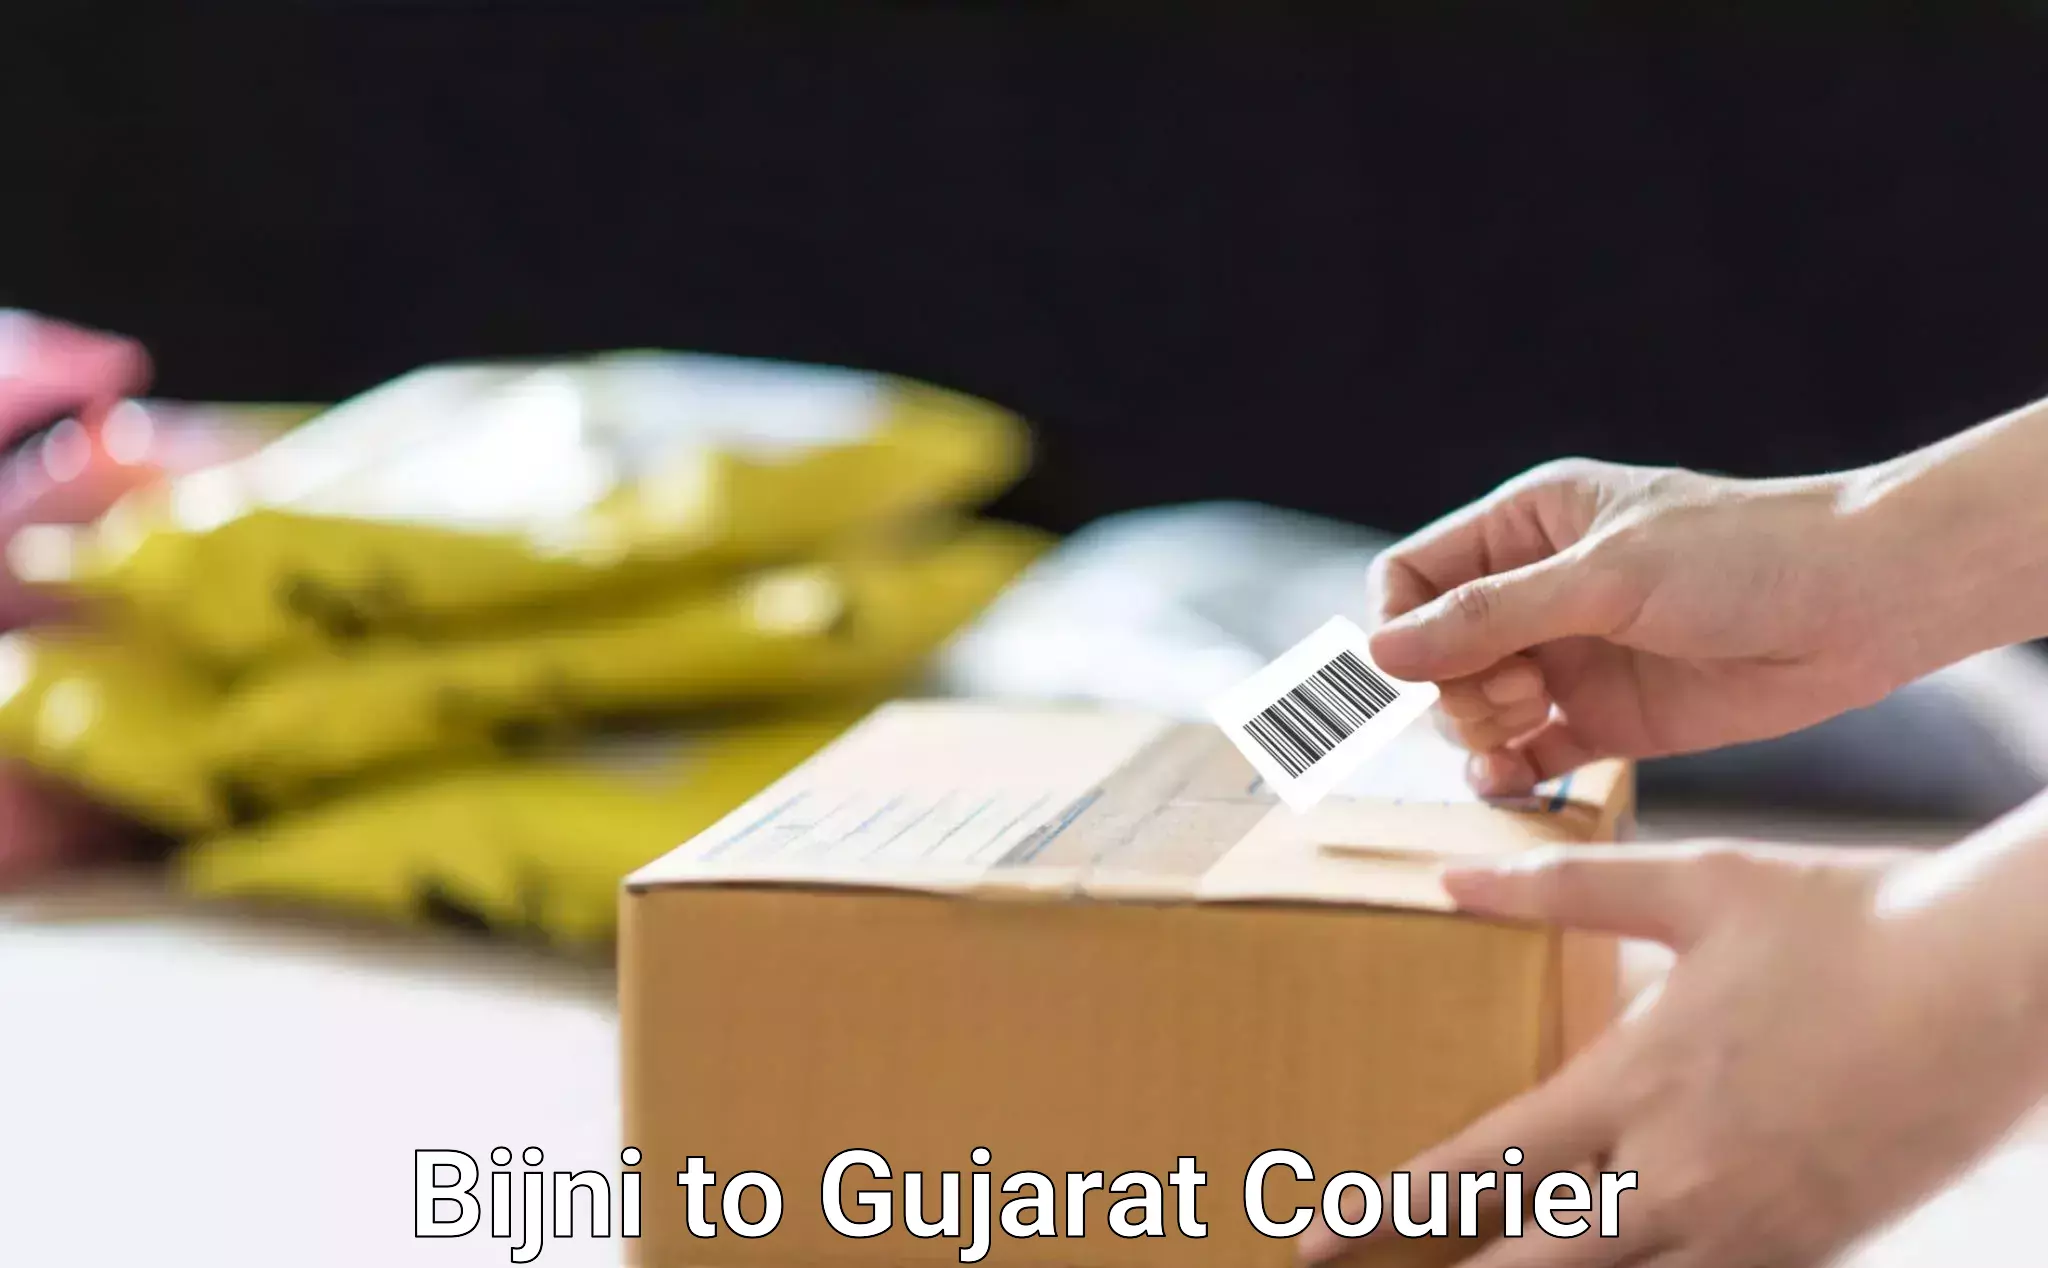 Track and trace shipping Bijni to Gujarat